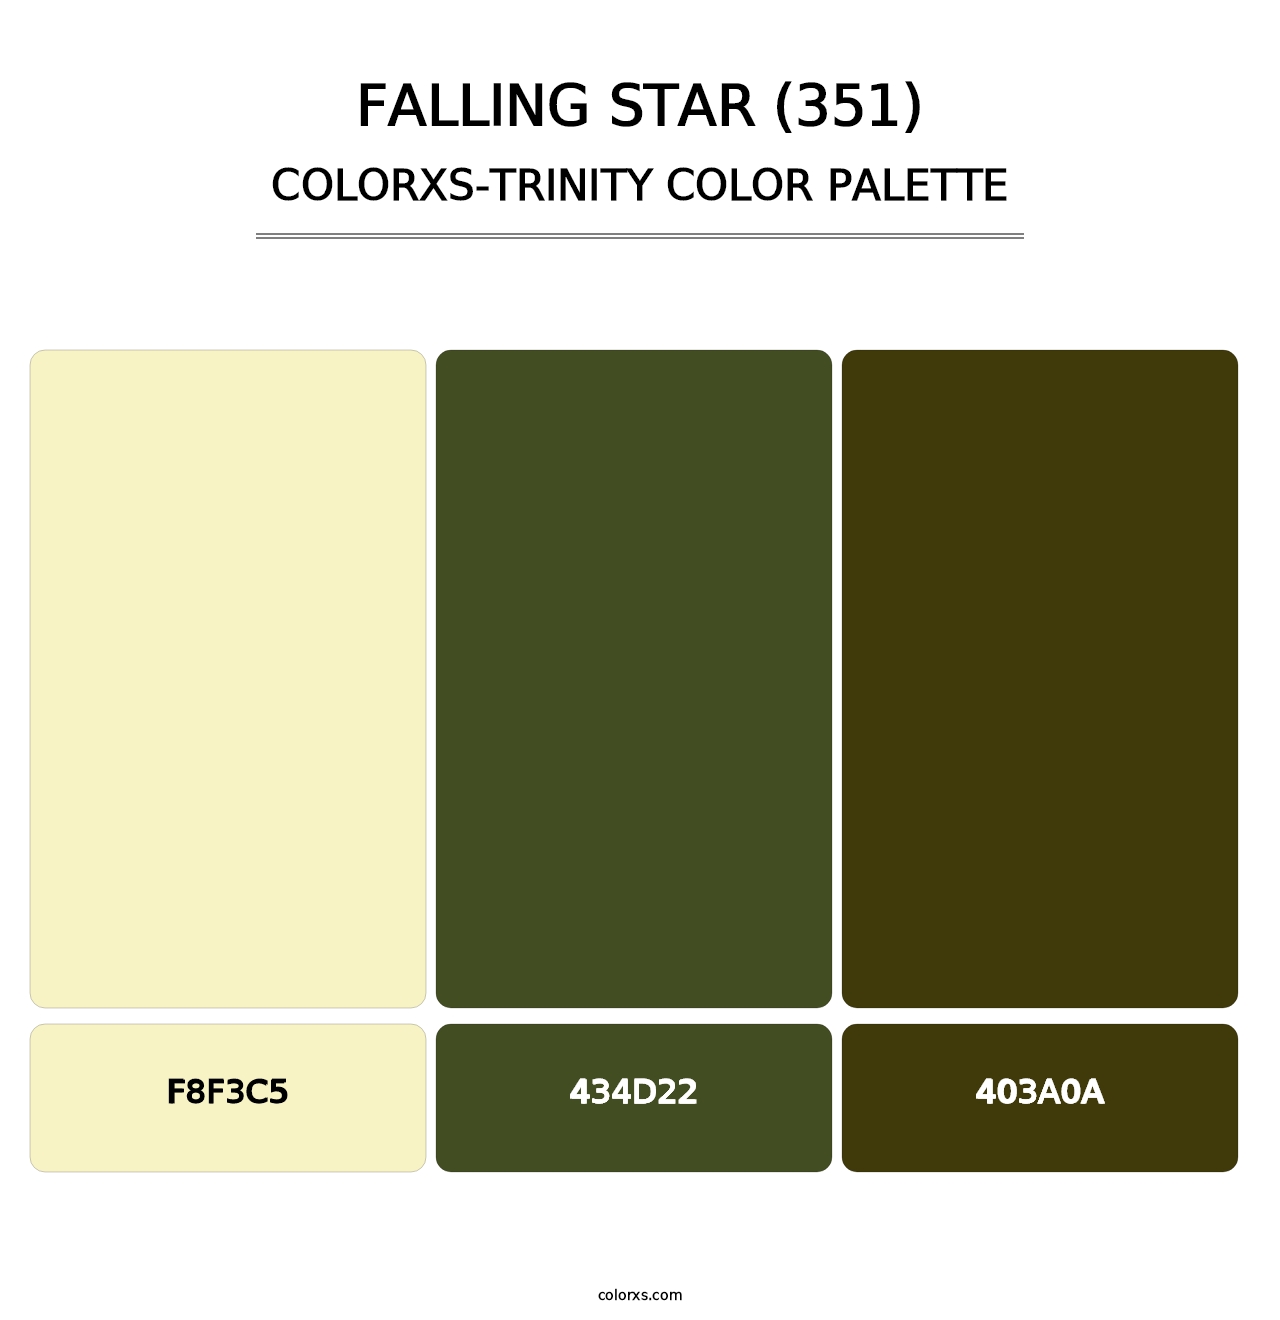 Falling Star (351) - Colorxs Trinity Palette